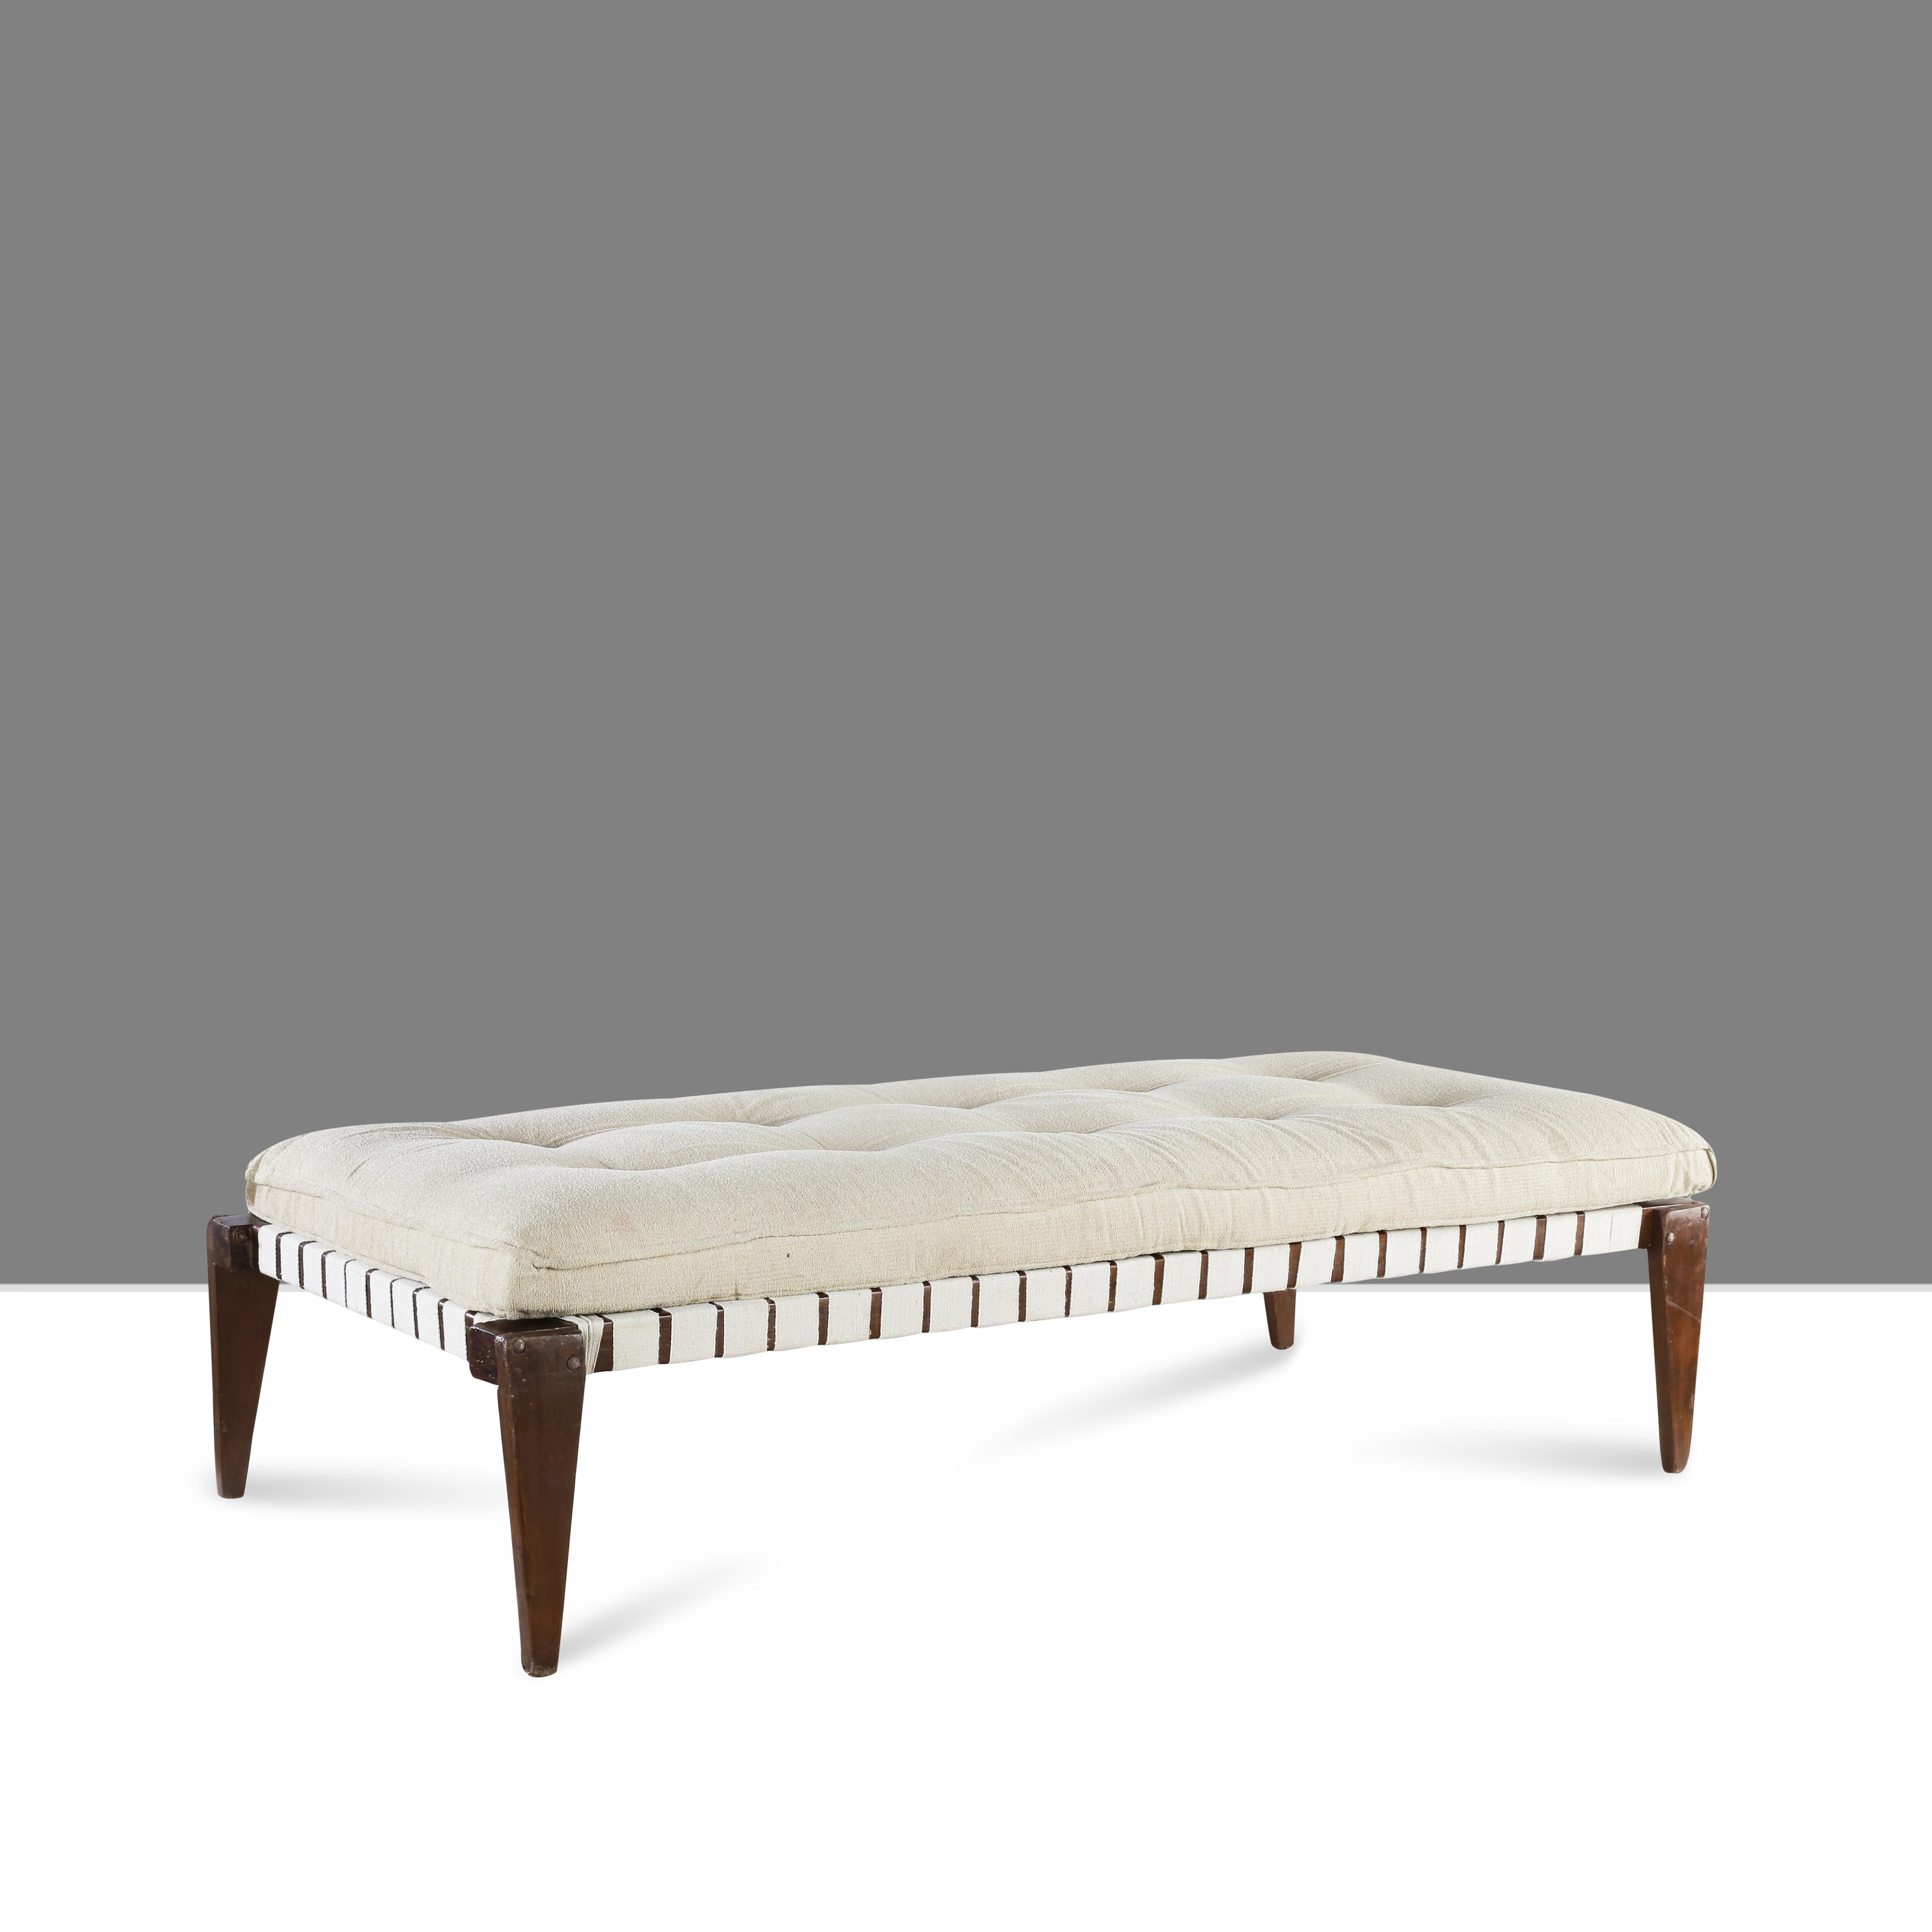 Hand-Woven Piere Jeanneret PJ-L-05-A Single Bed / Authentic Mid-Century Modern For Sale